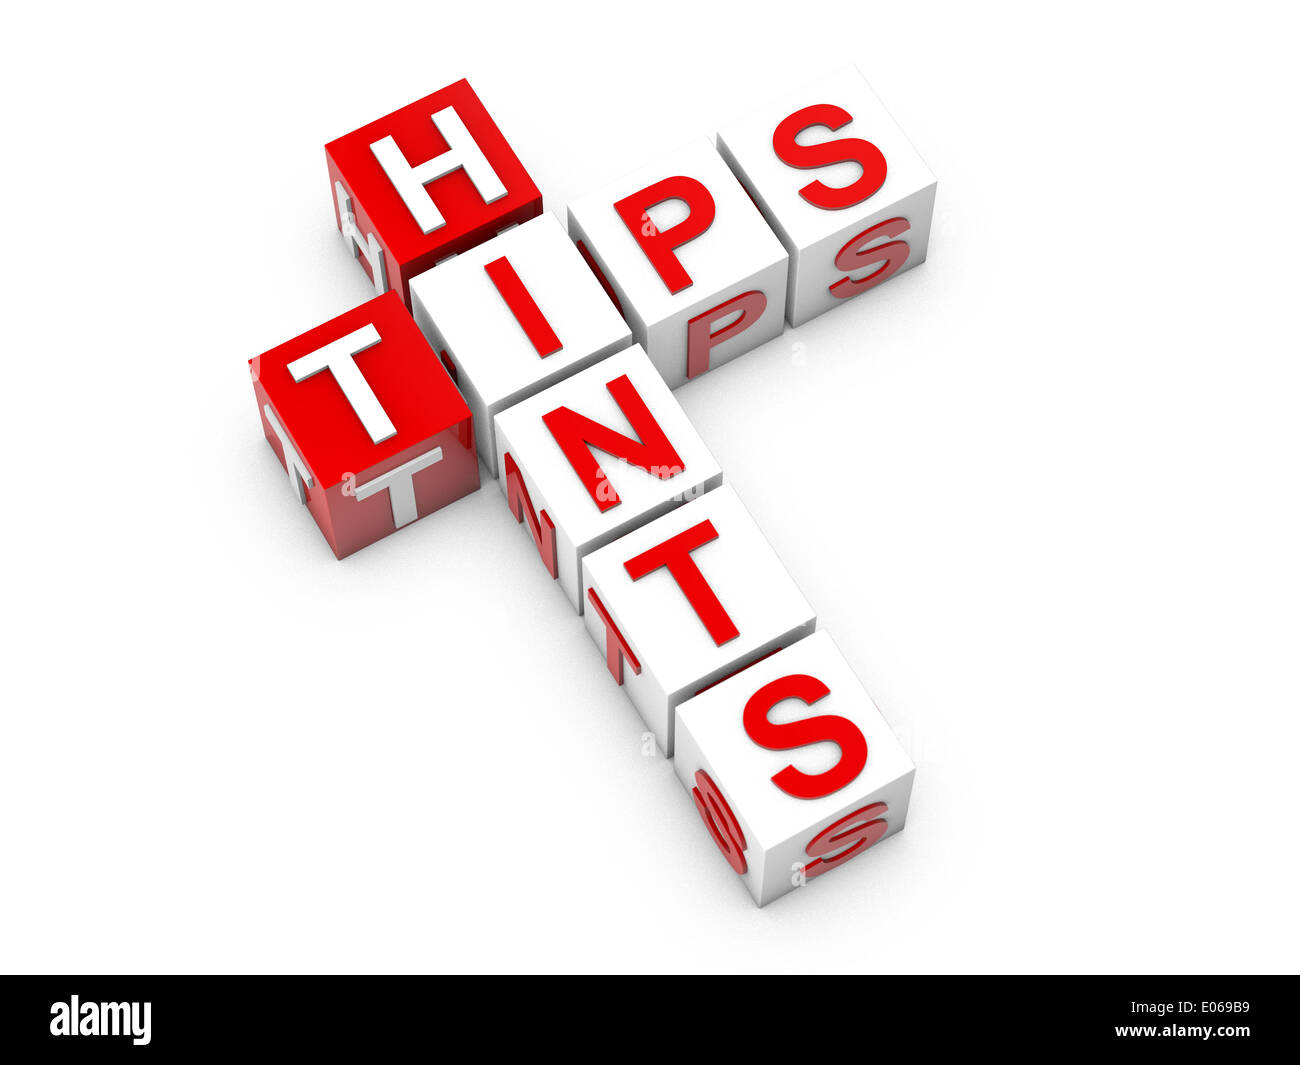 Hints tips cubes over white background Stock Photo